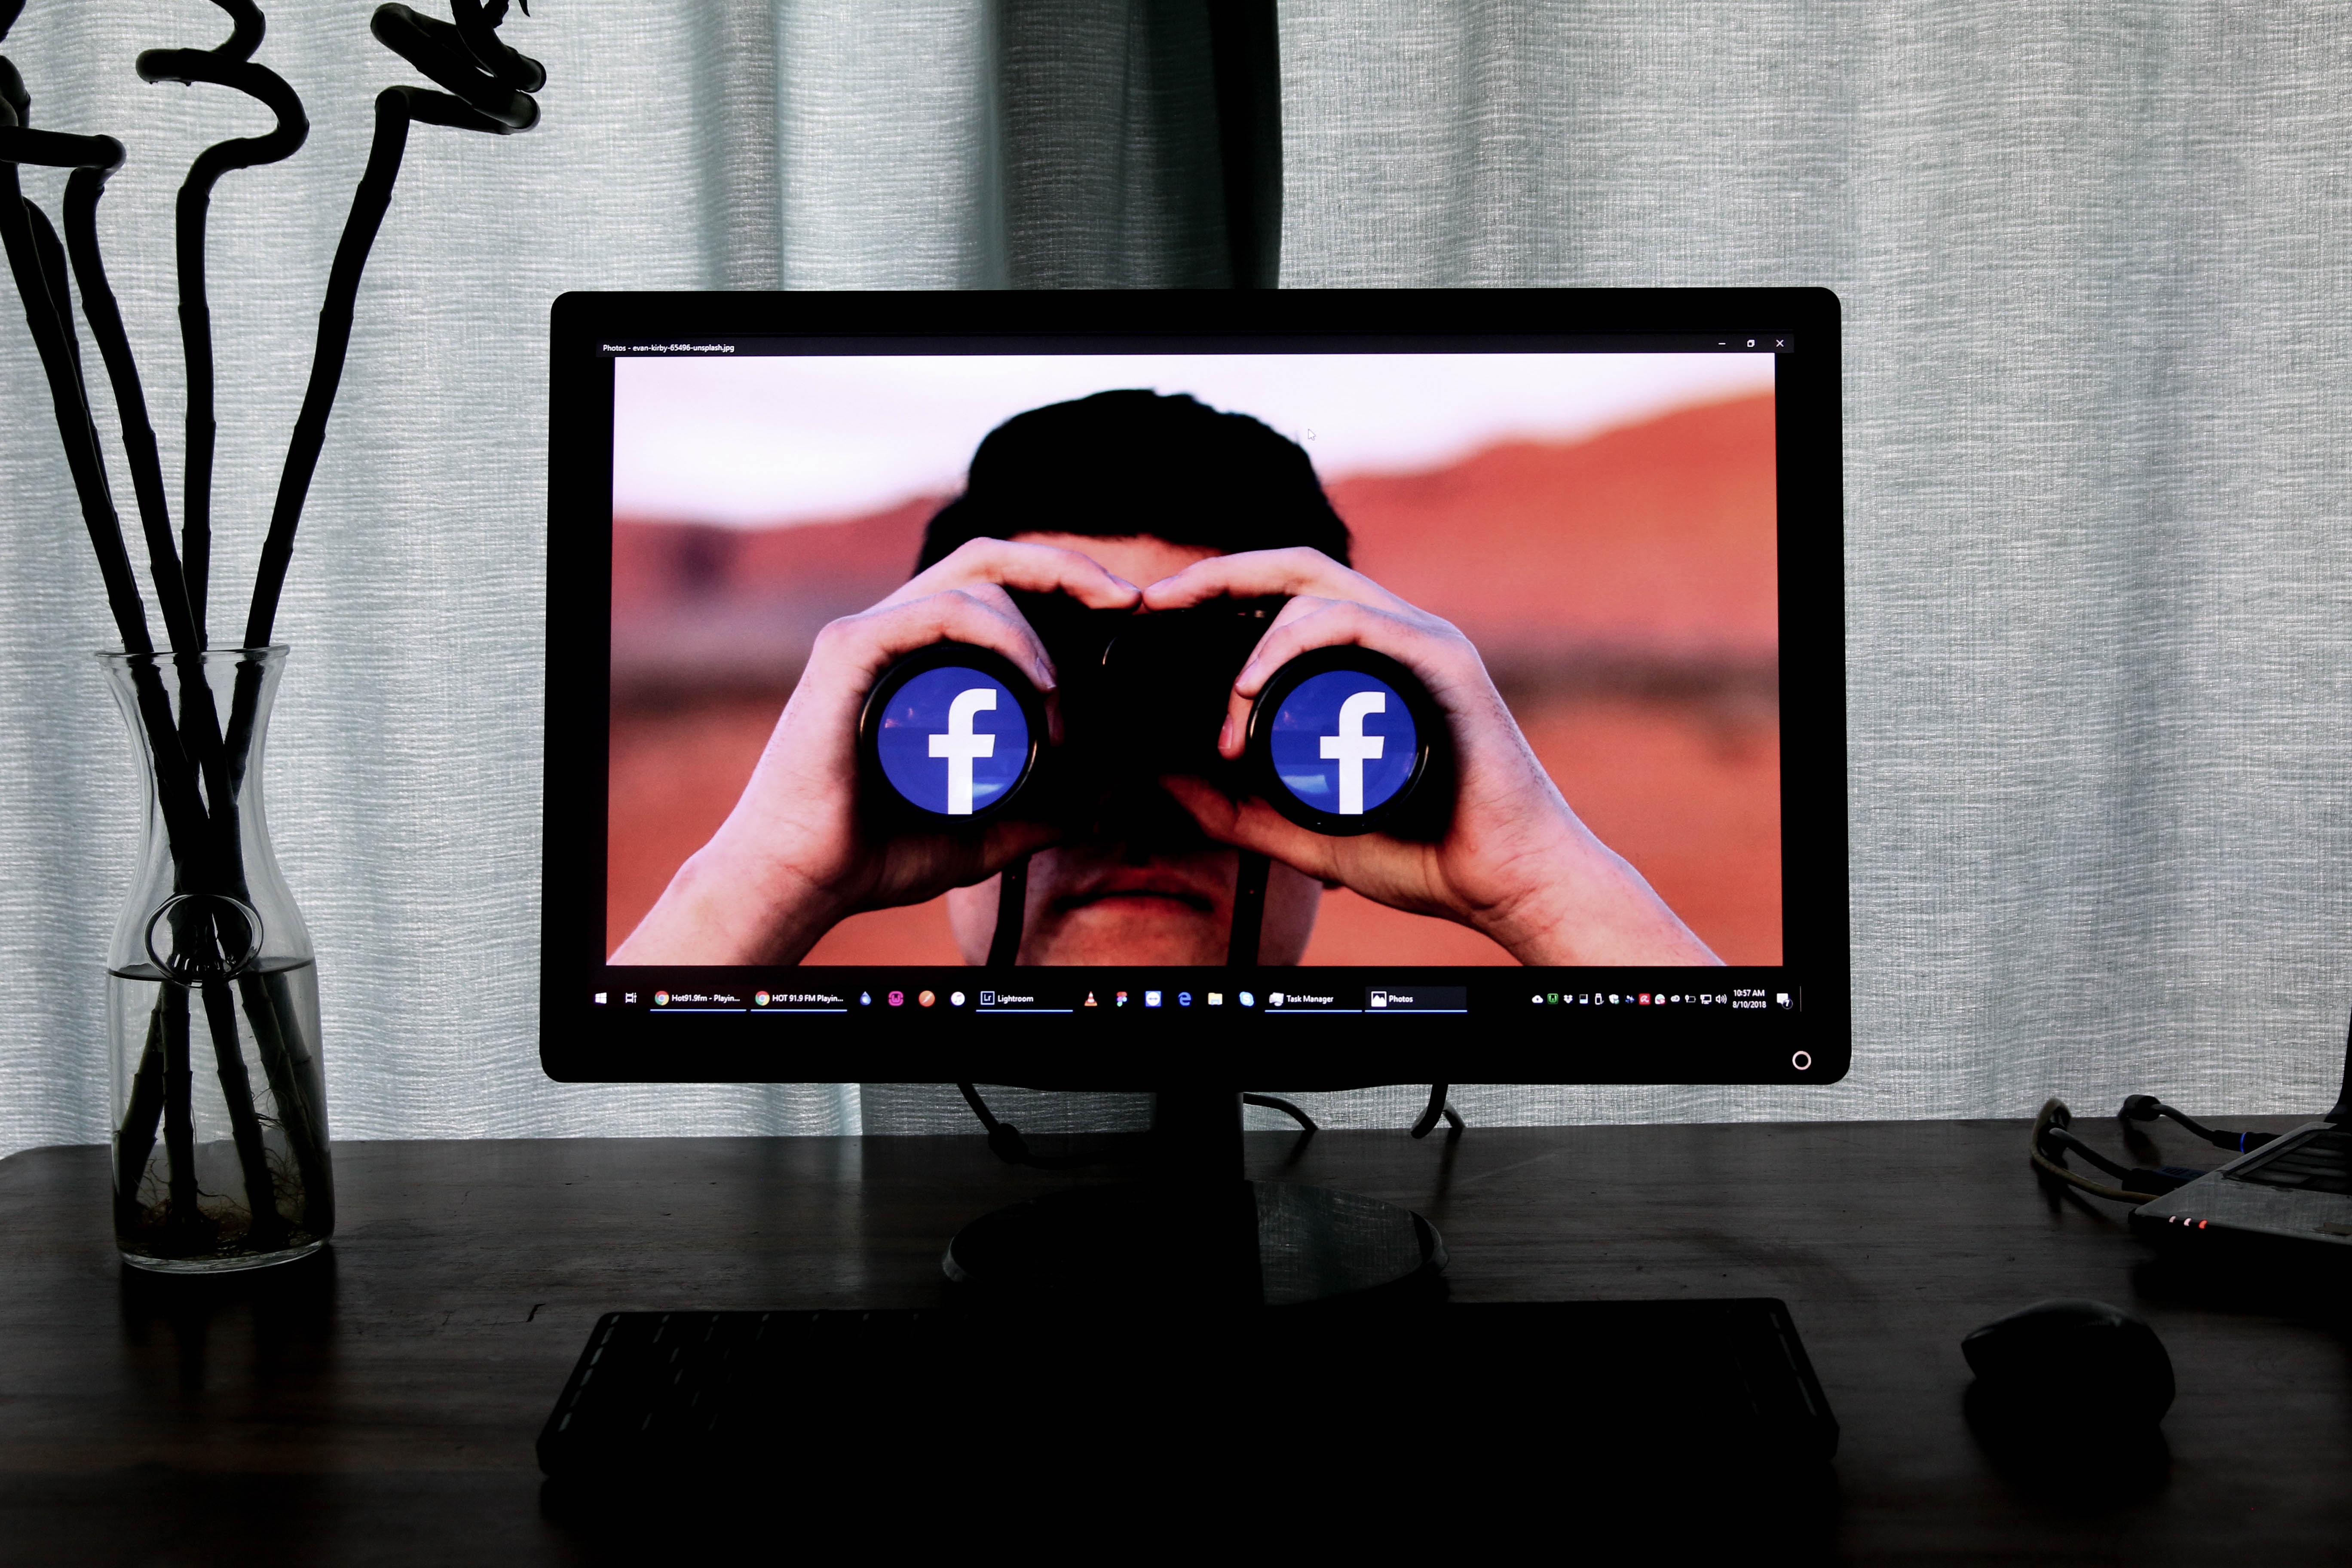 Facebook is watching you